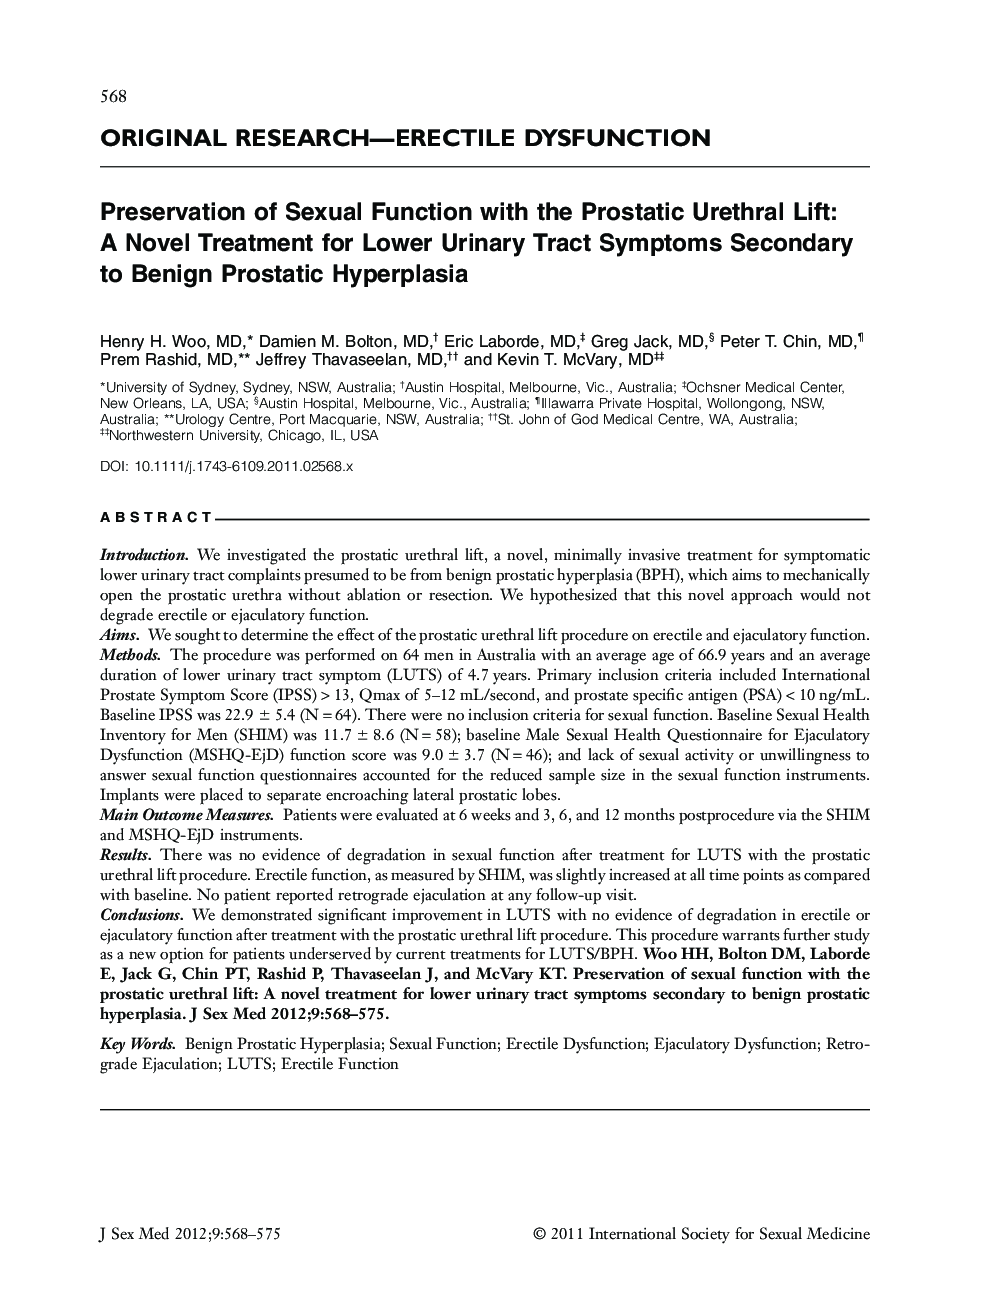 Preservation of Sexual Function with the Prostatic Urethral Lift: A Novel Treatment for Lower Urinary Tract Symptoms Secondary to Benign Prostatic Hyperplasia